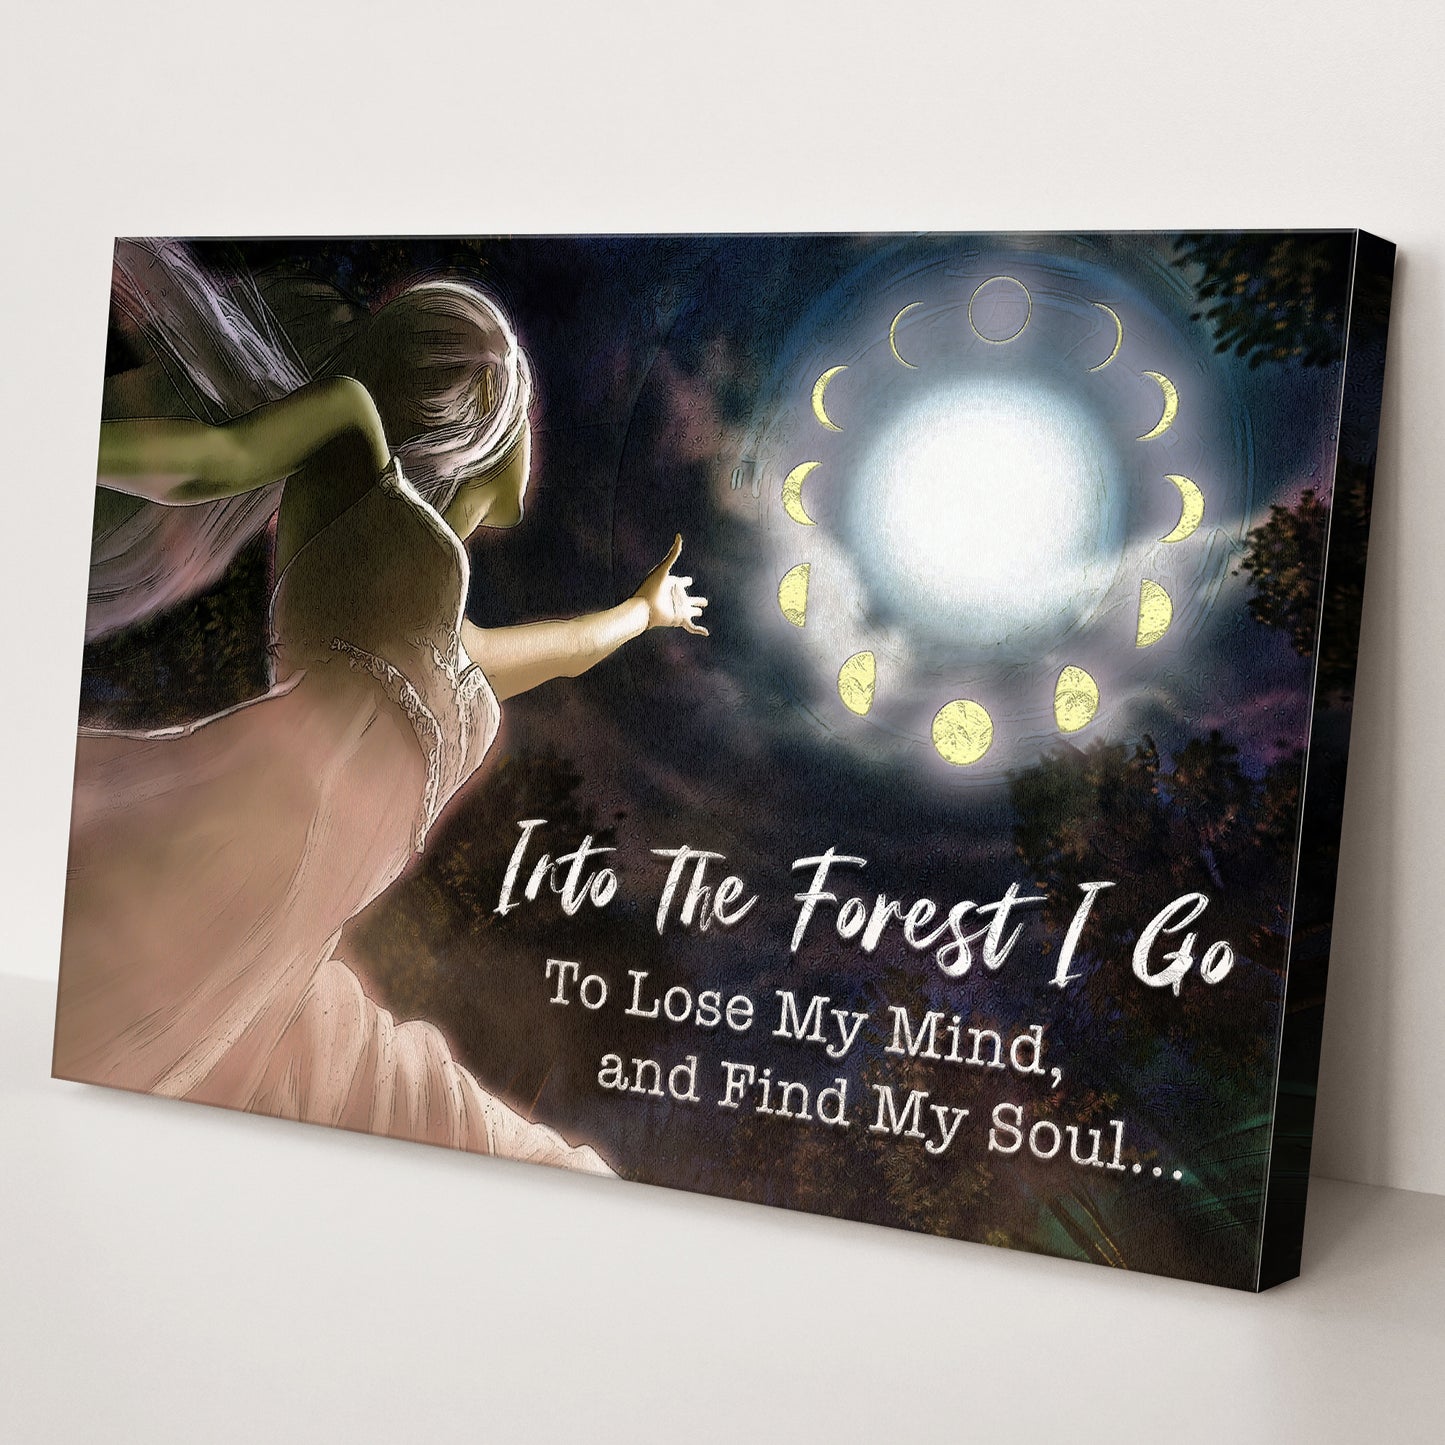 Into The Forest I Go Nature Sign - Image by Tailored Canvases